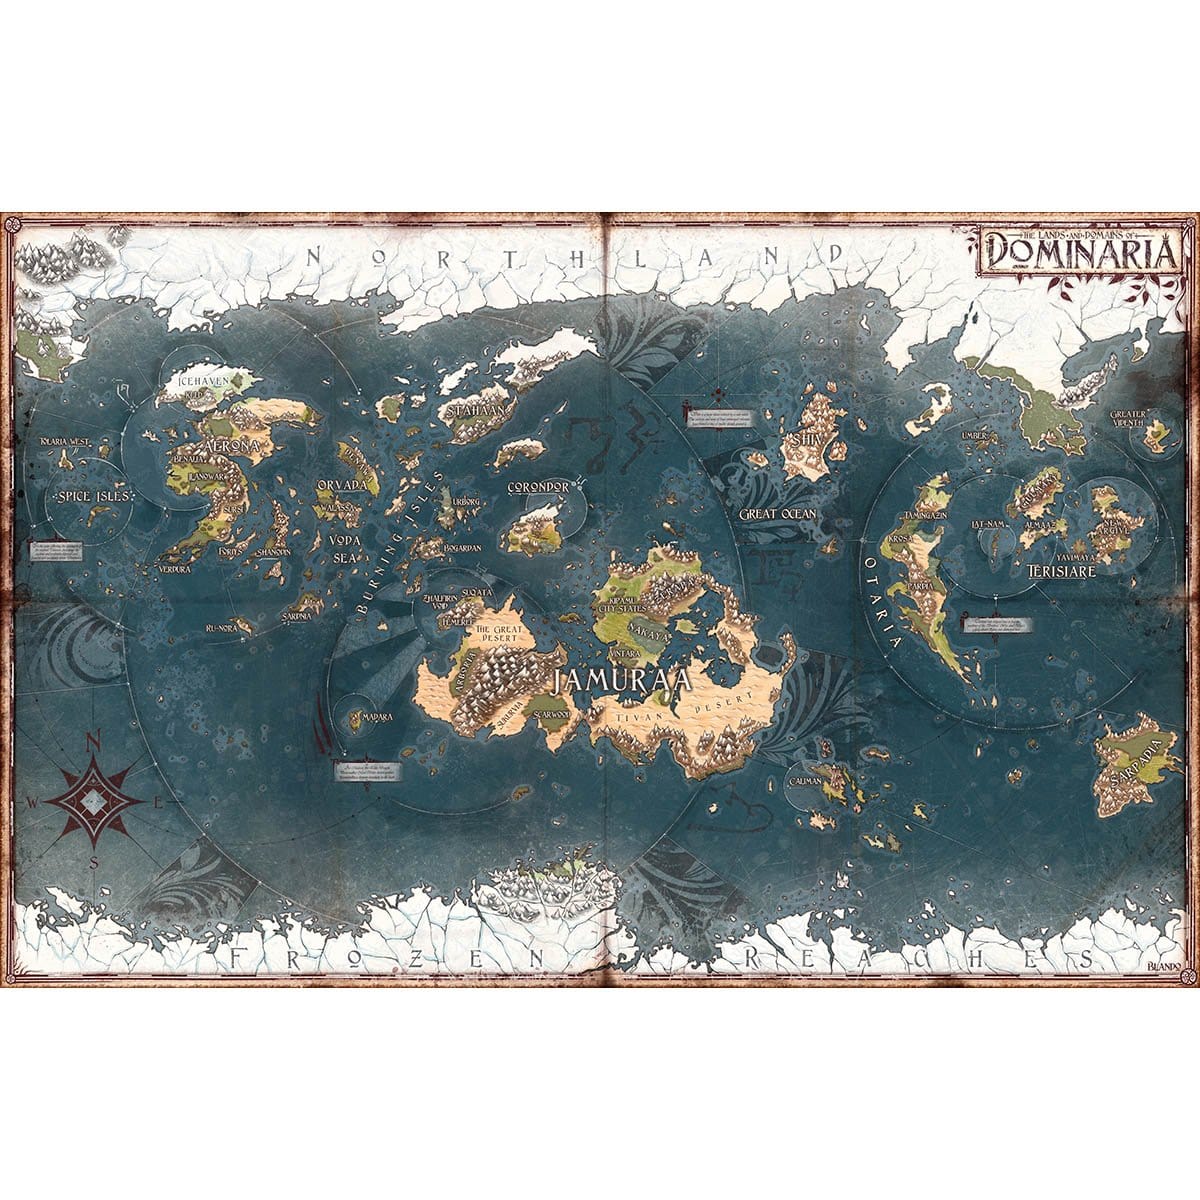 Dominaria Map Print - Print - Original Magic Art - Accessories for Magic the Gathering and other card games